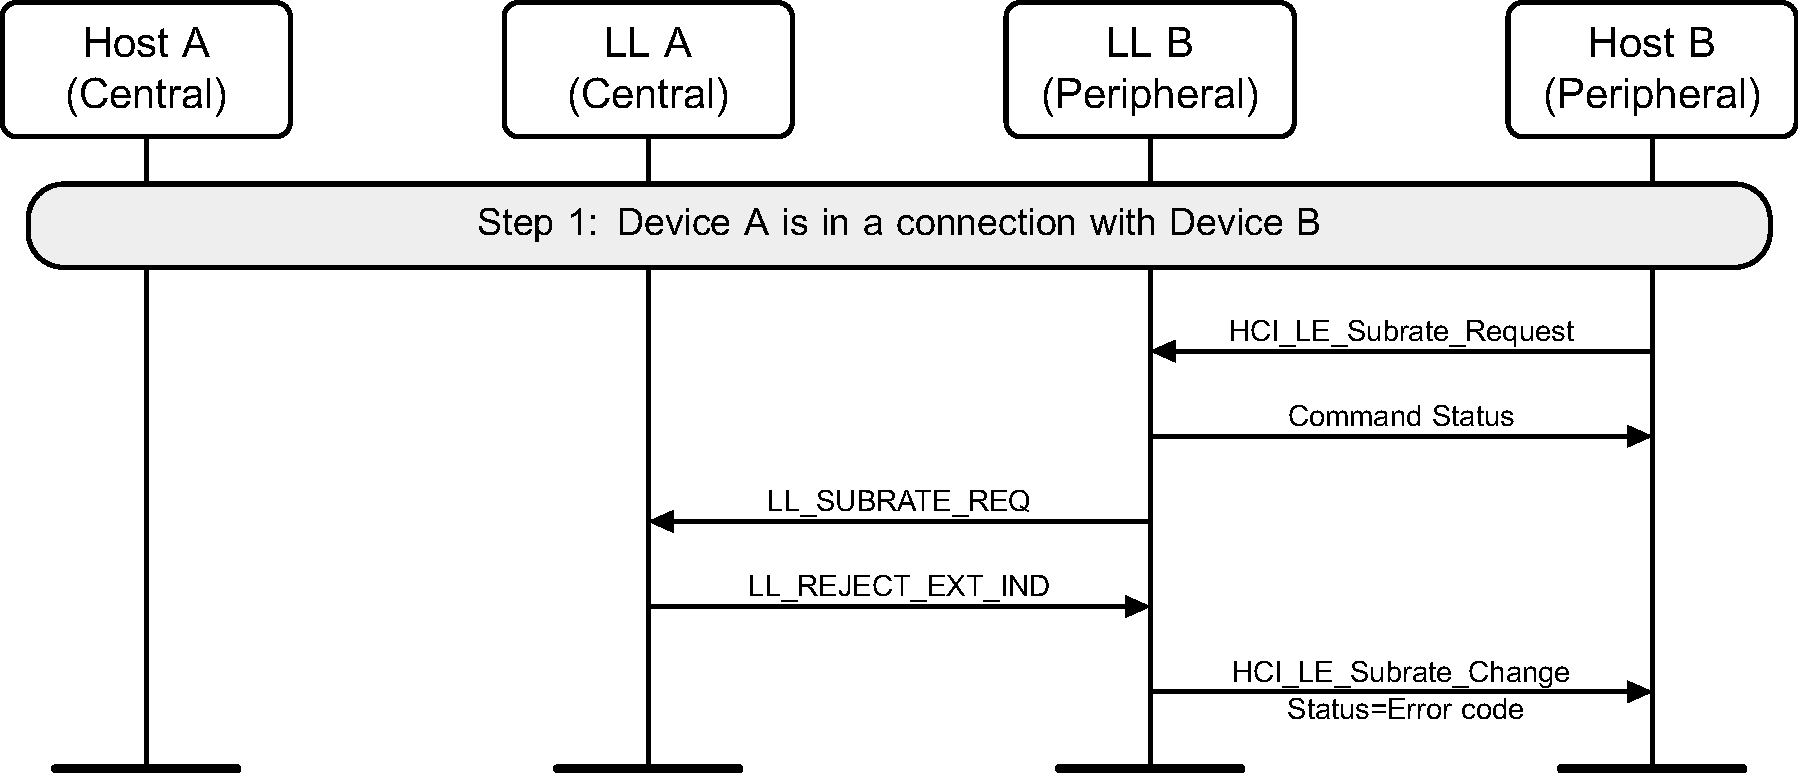 Peripheral B requests a change to the connection subrate which is rejected